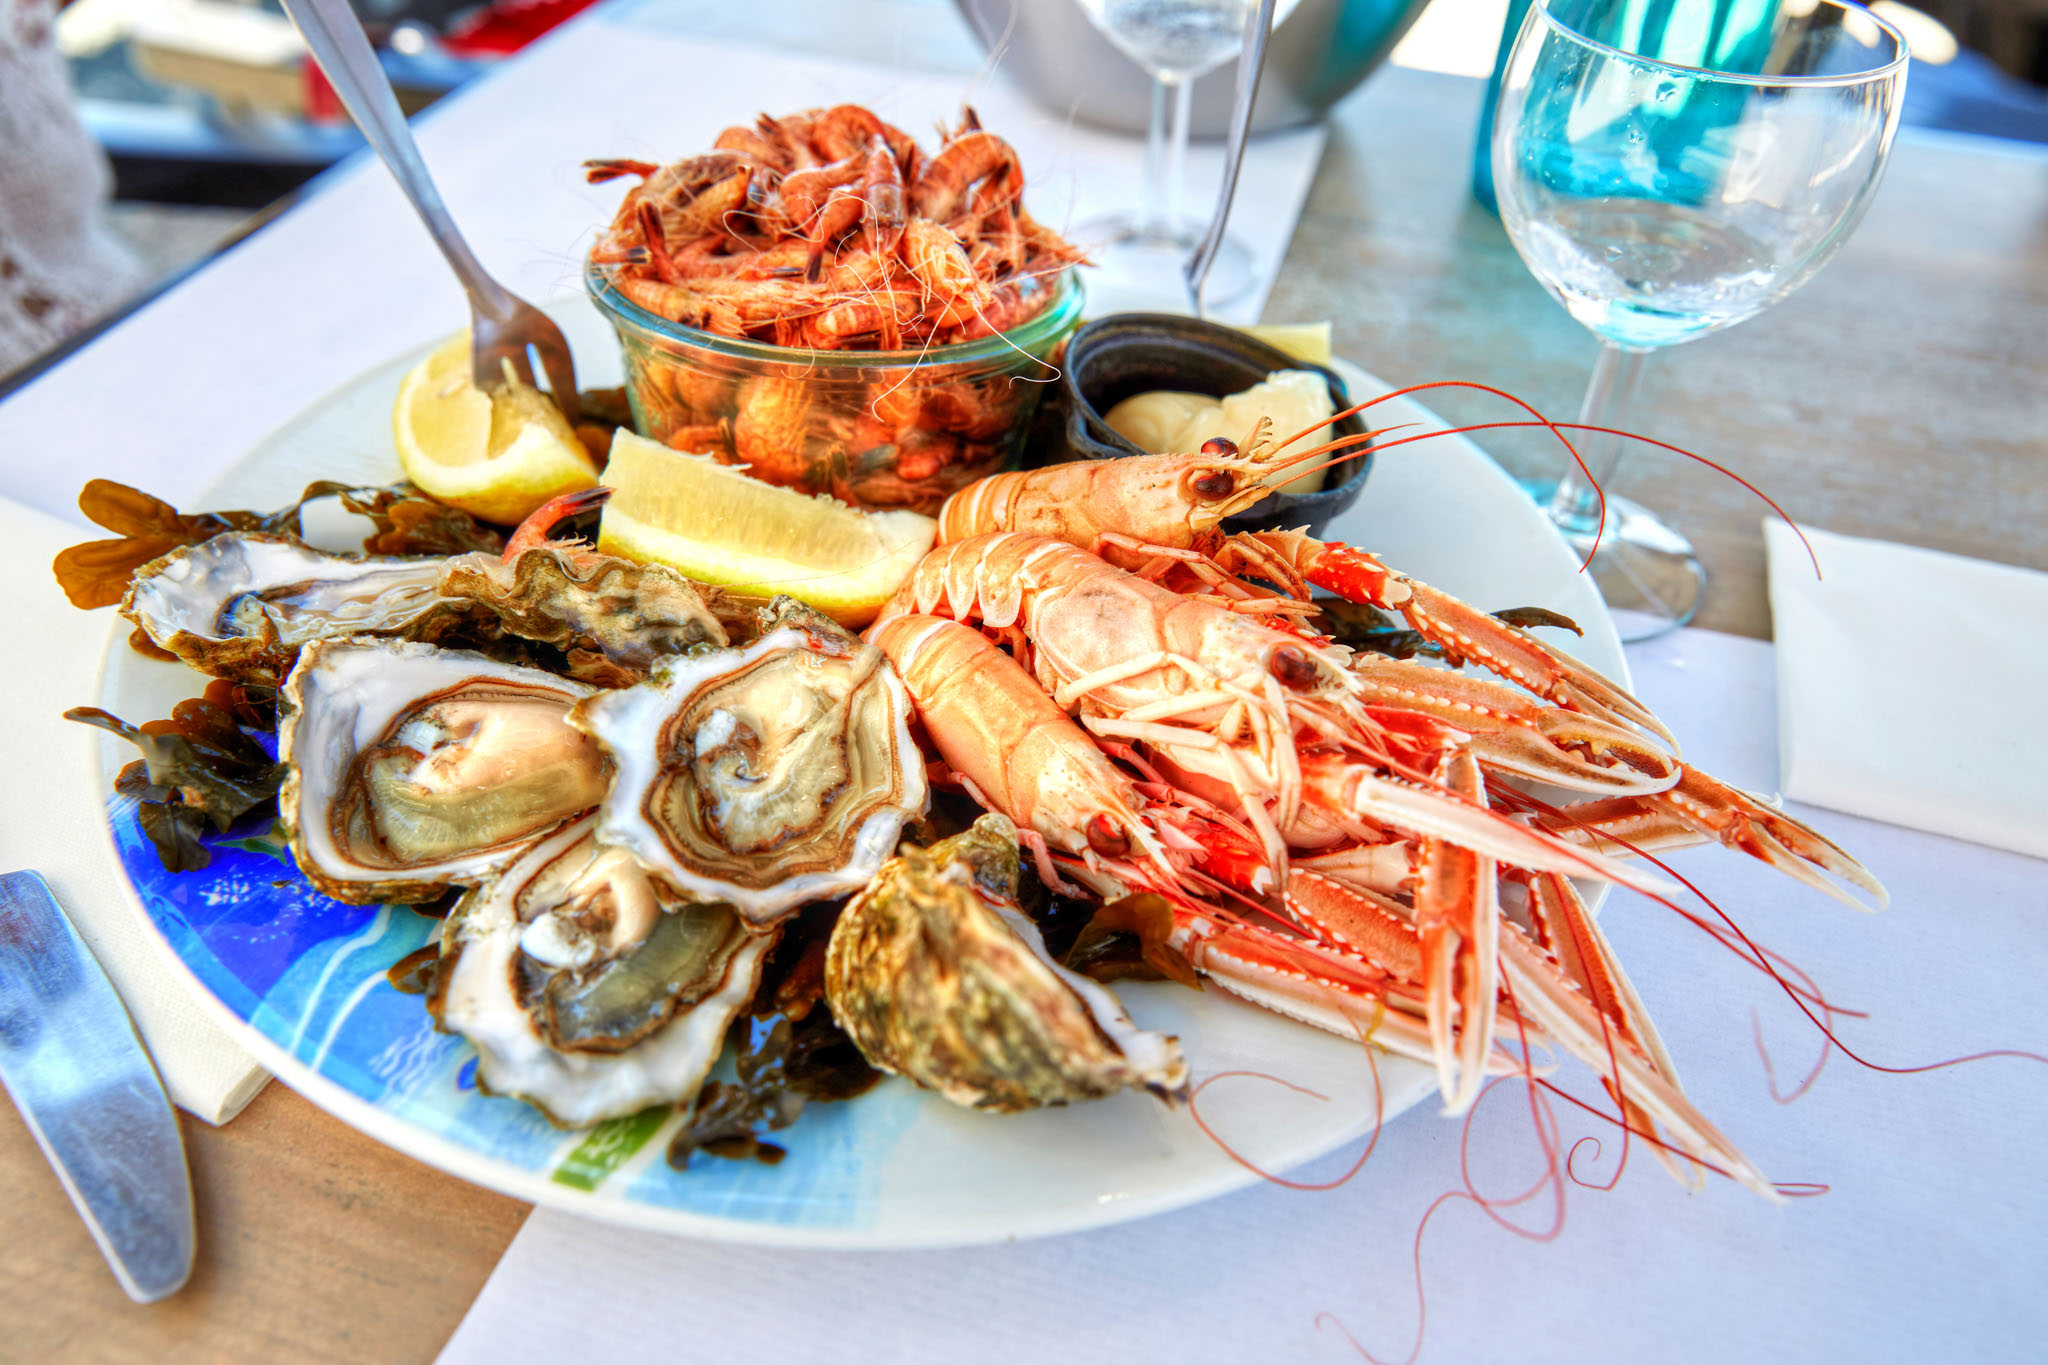 Enjoy seafood on the seafront